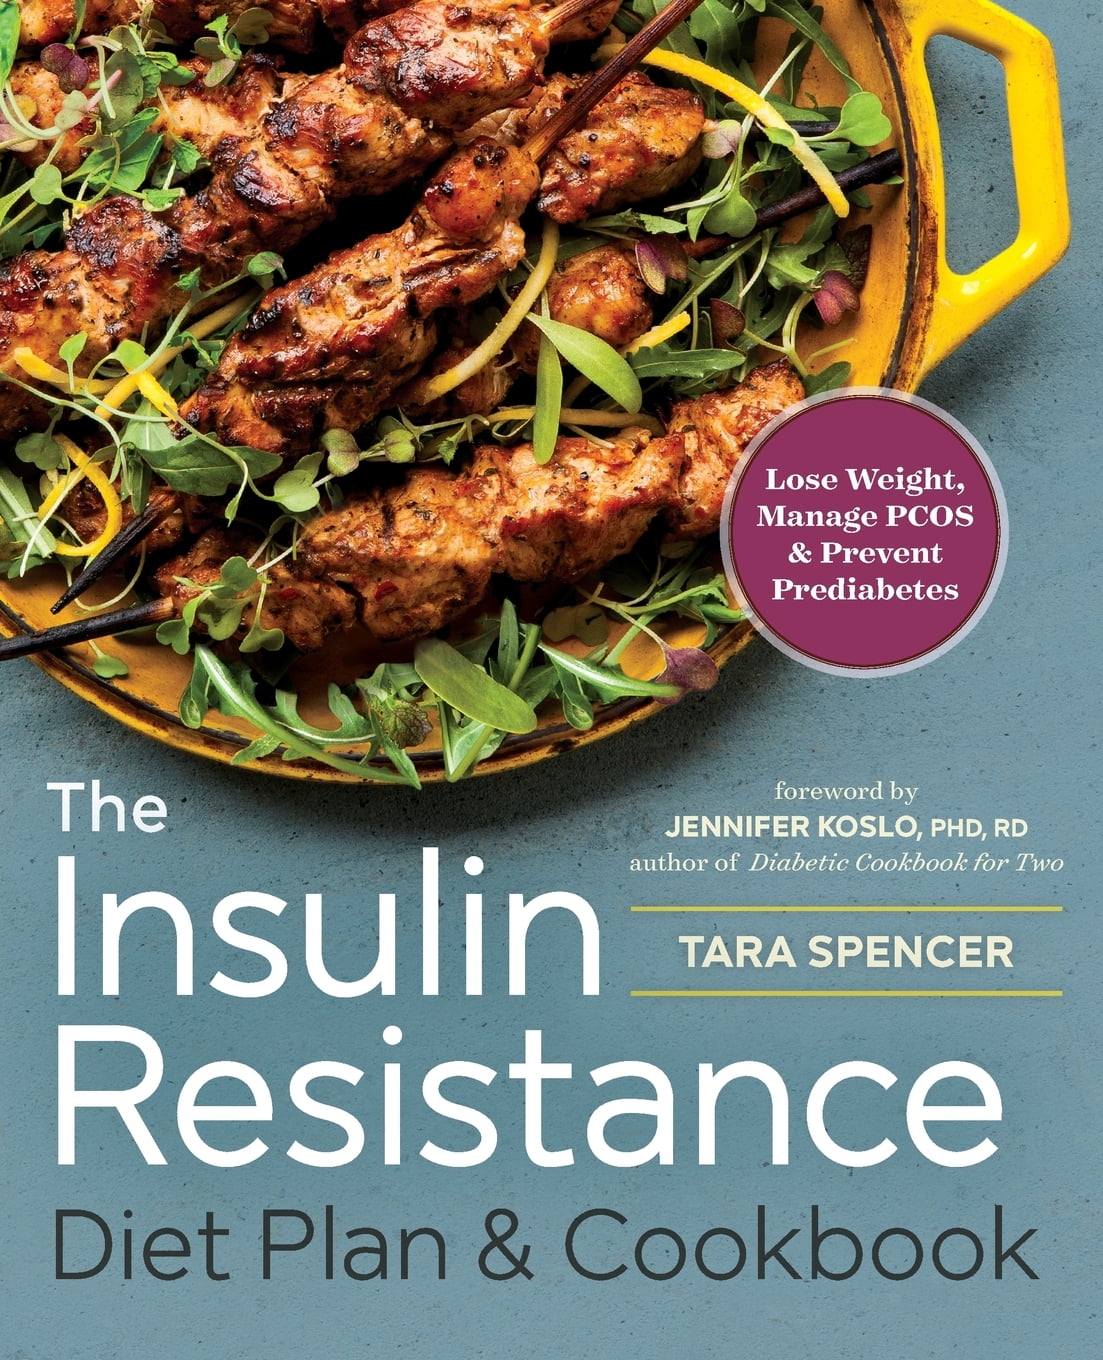 The Insulin Resistance Diet Plan & Cookbook : Lose Weight, Manage Pcos